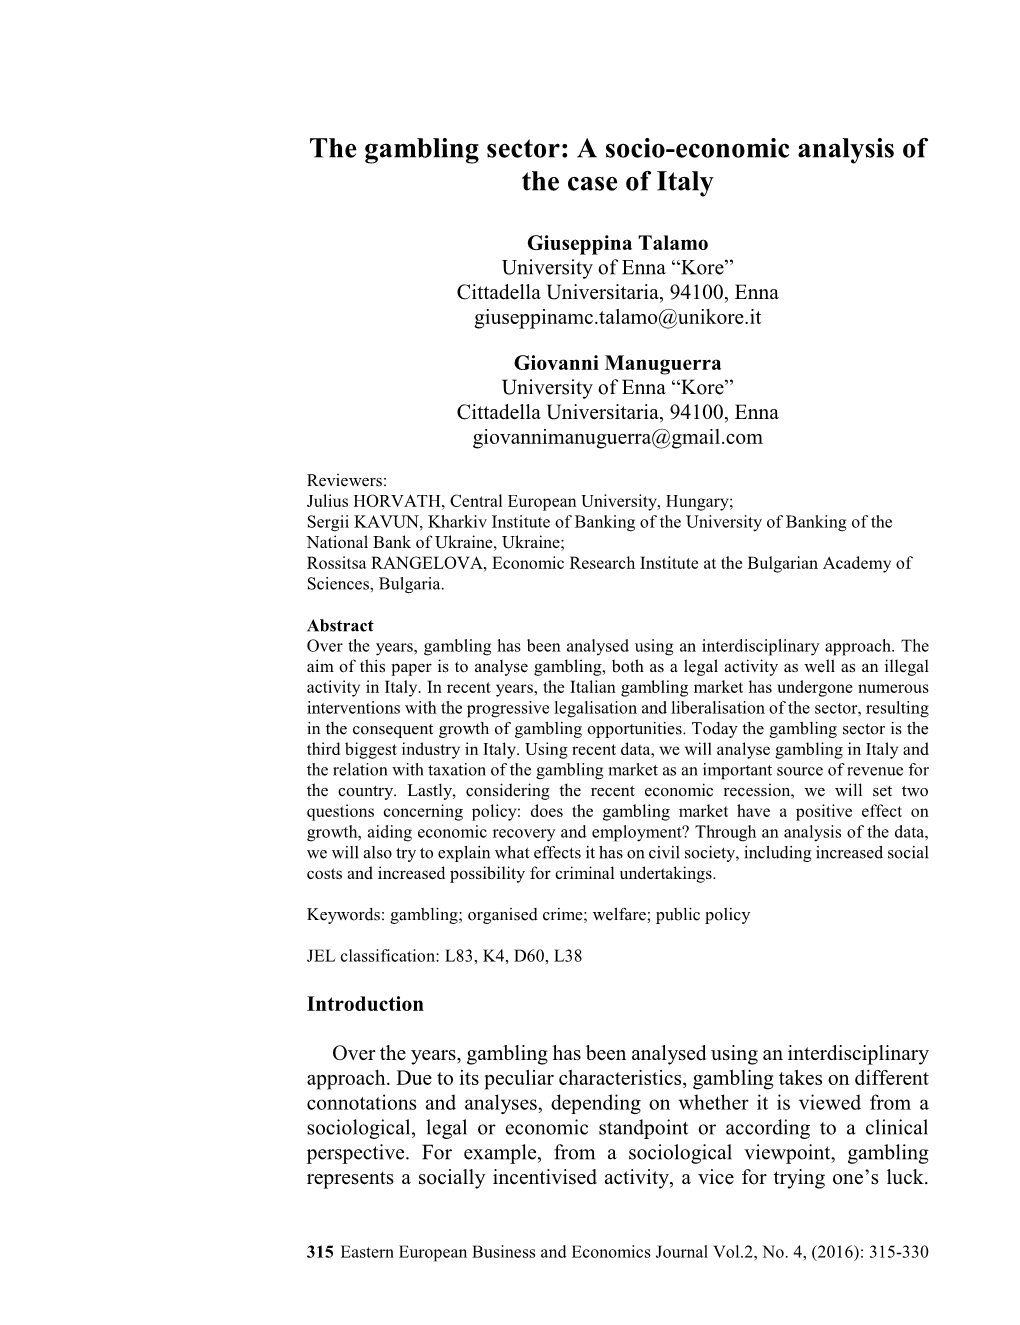 The Gambling Sector: a Socio-Economic Analysis of the Case of Italy